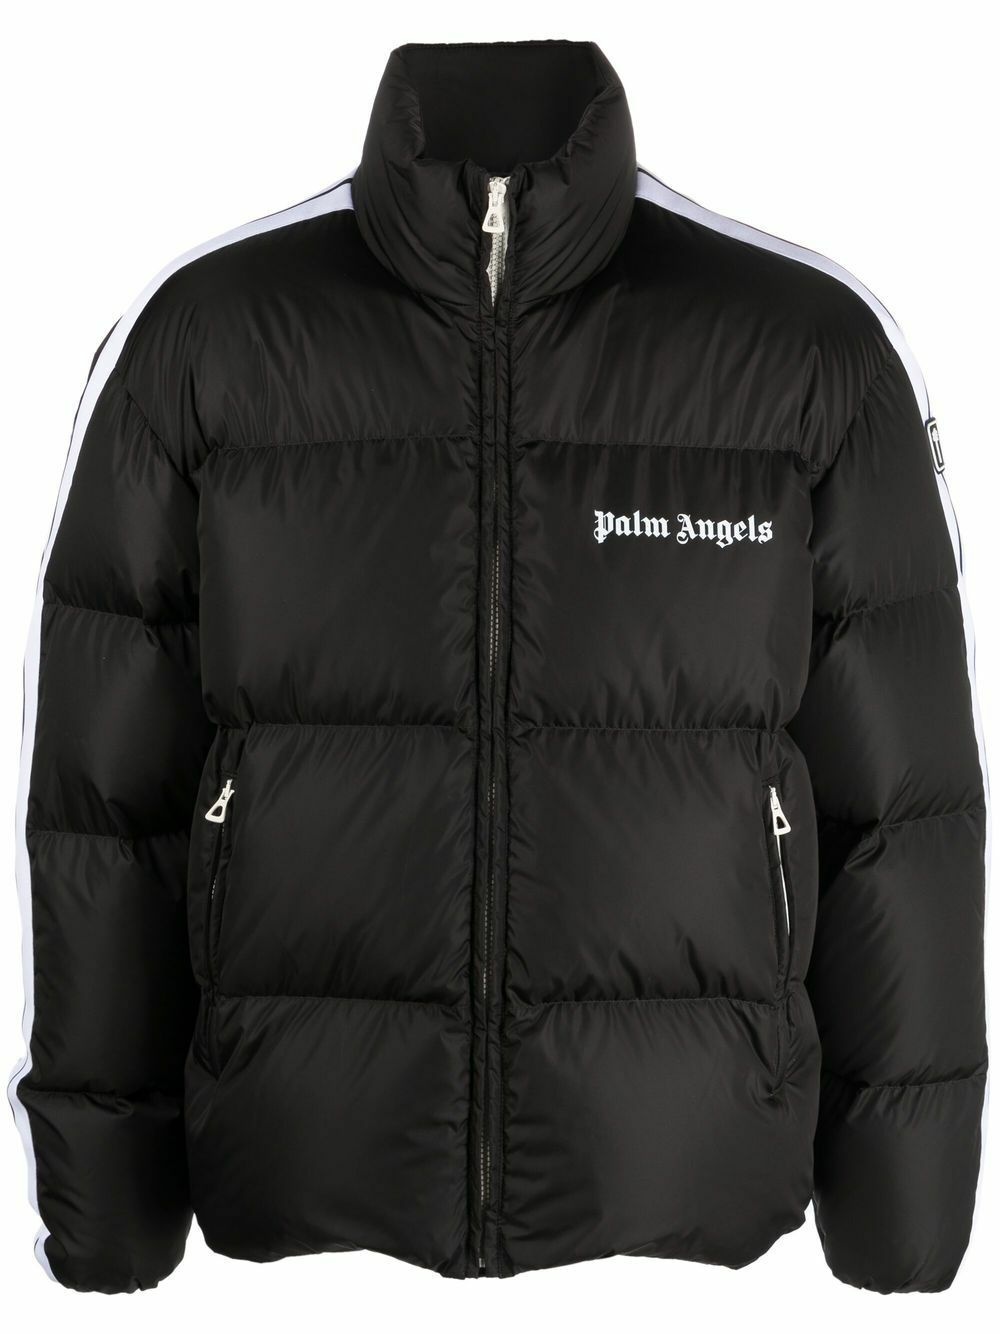 PALM ANGELS - Classic Track Down Jacket Palm Angels